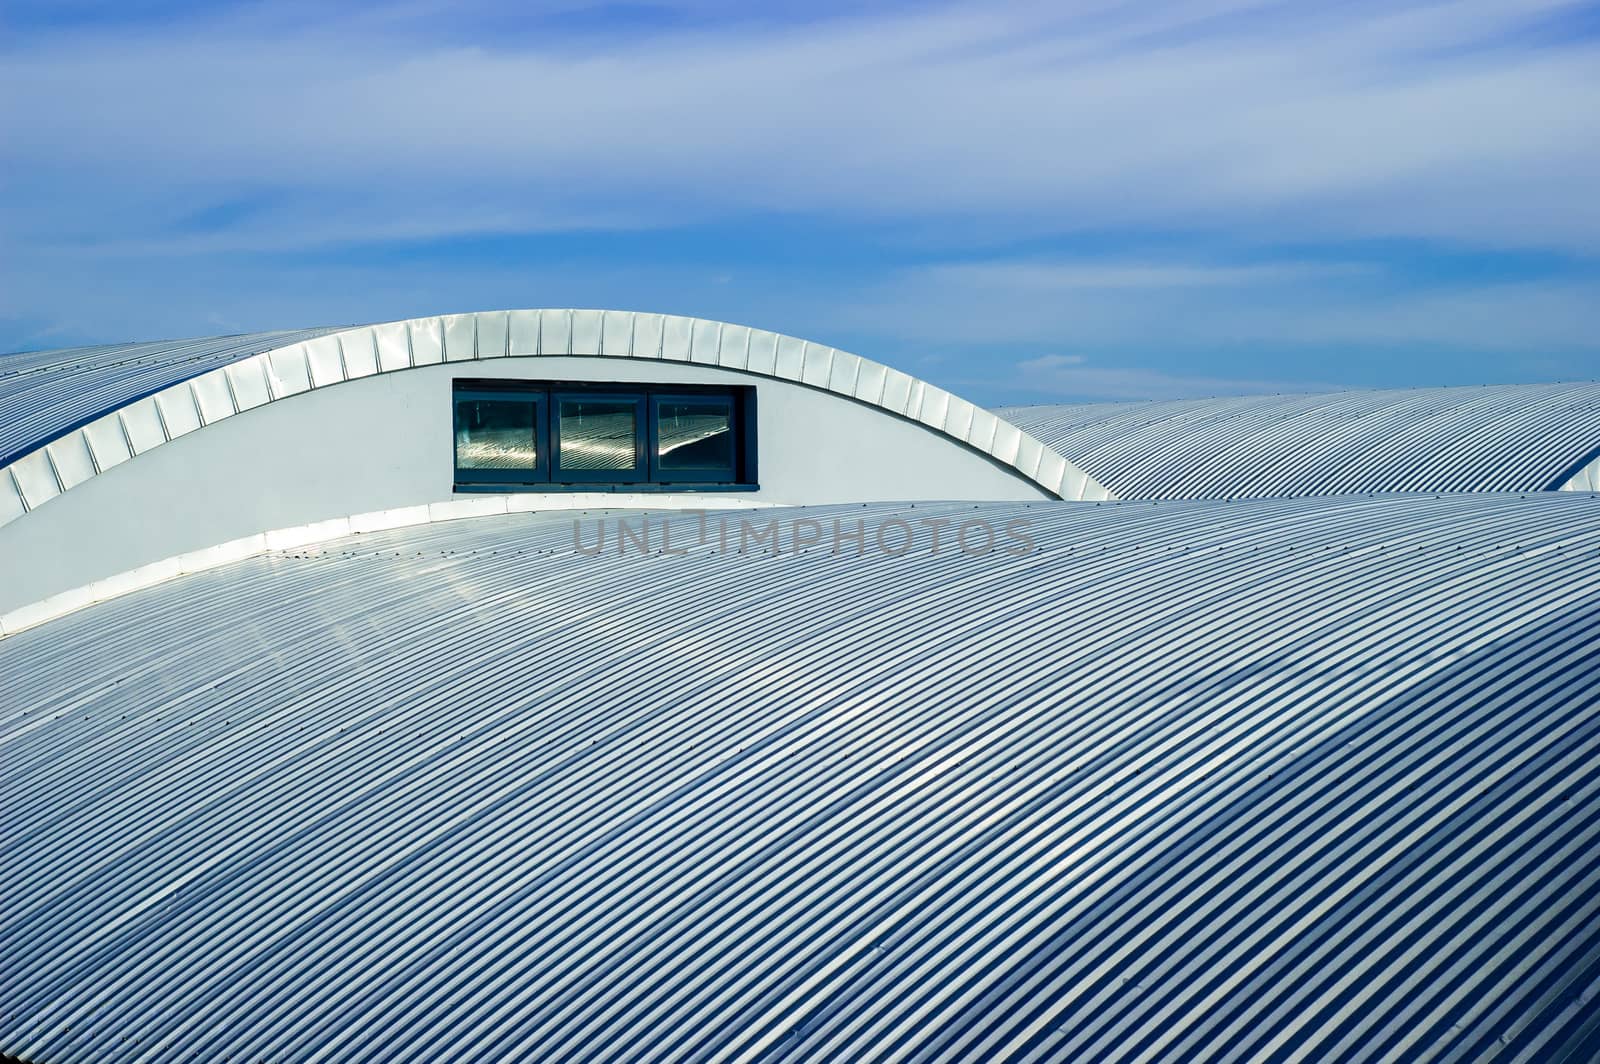 Metallic roof and blue sky with clouds